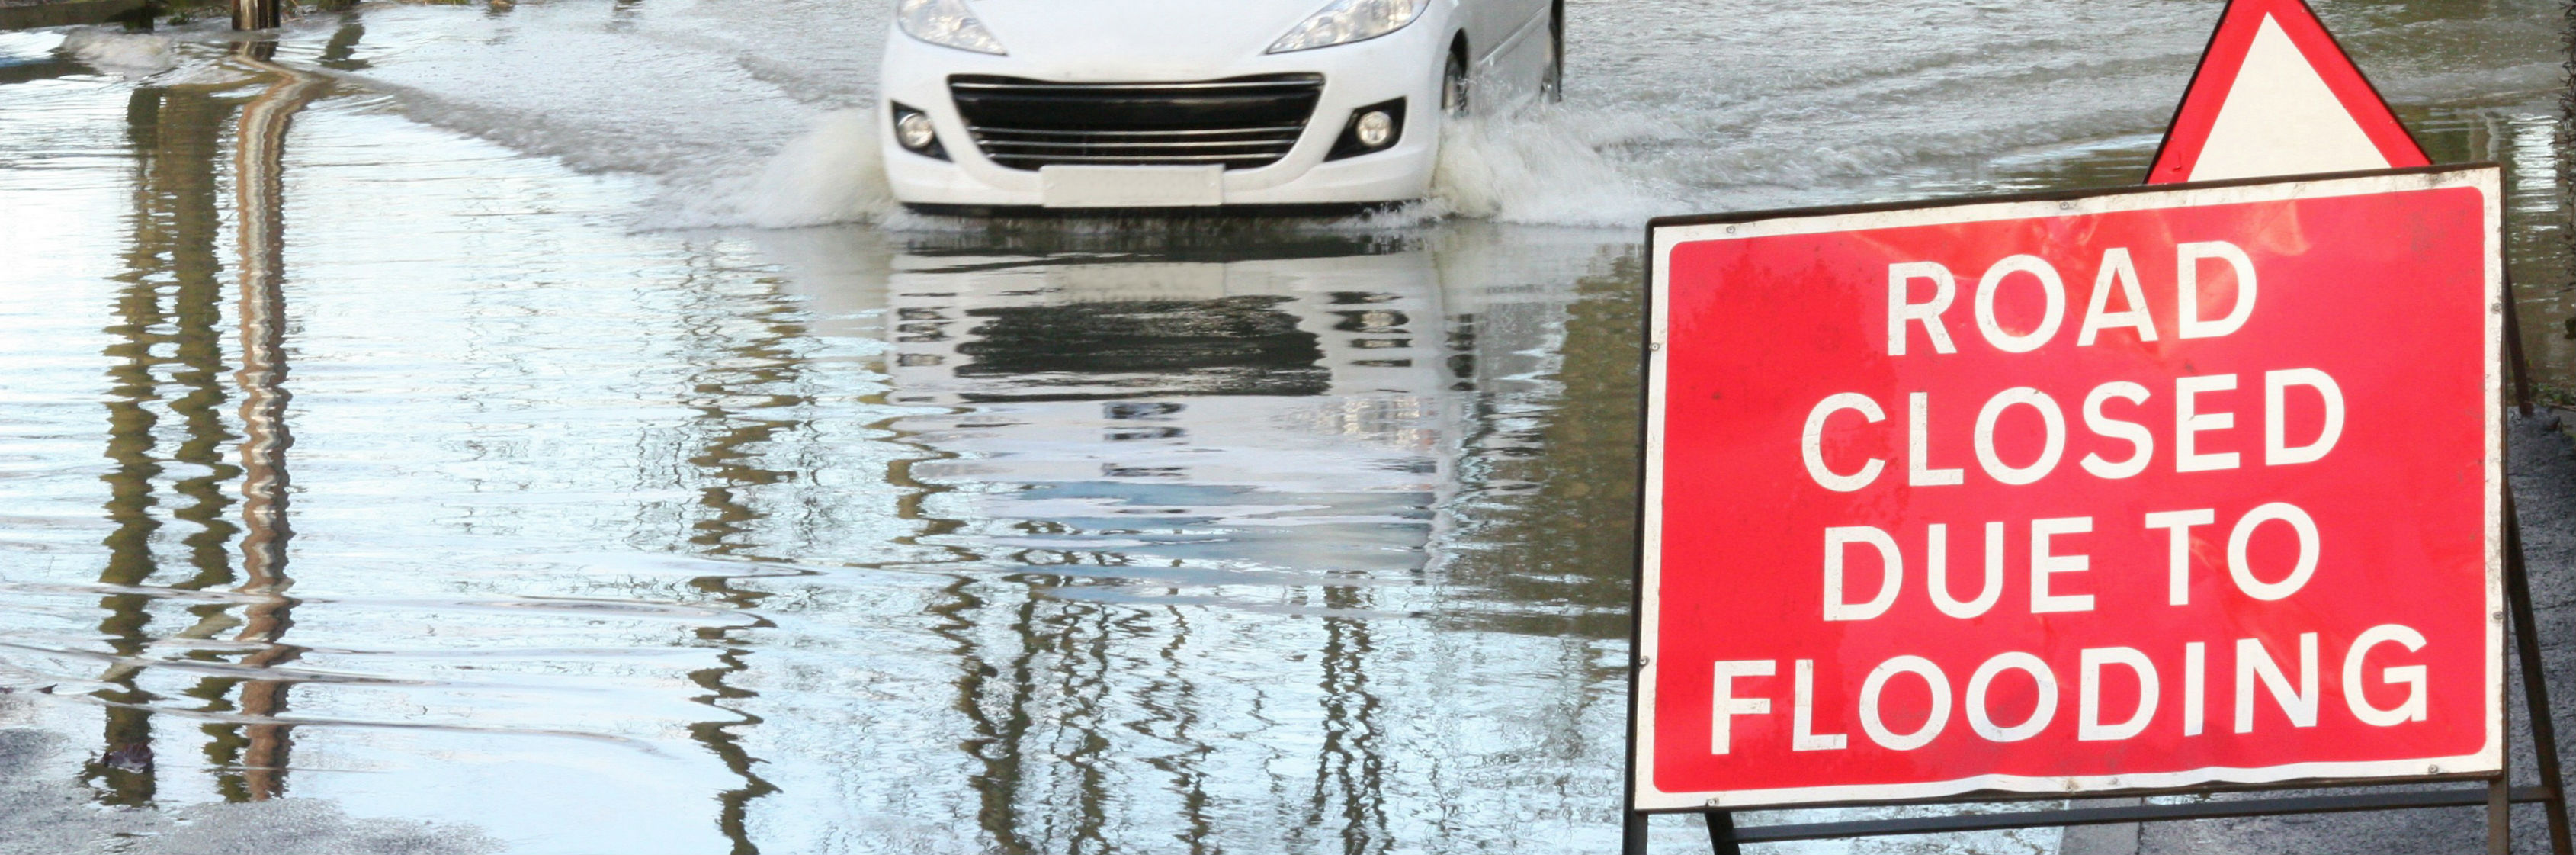 The demand for specialist flood risk management skills continues to grow